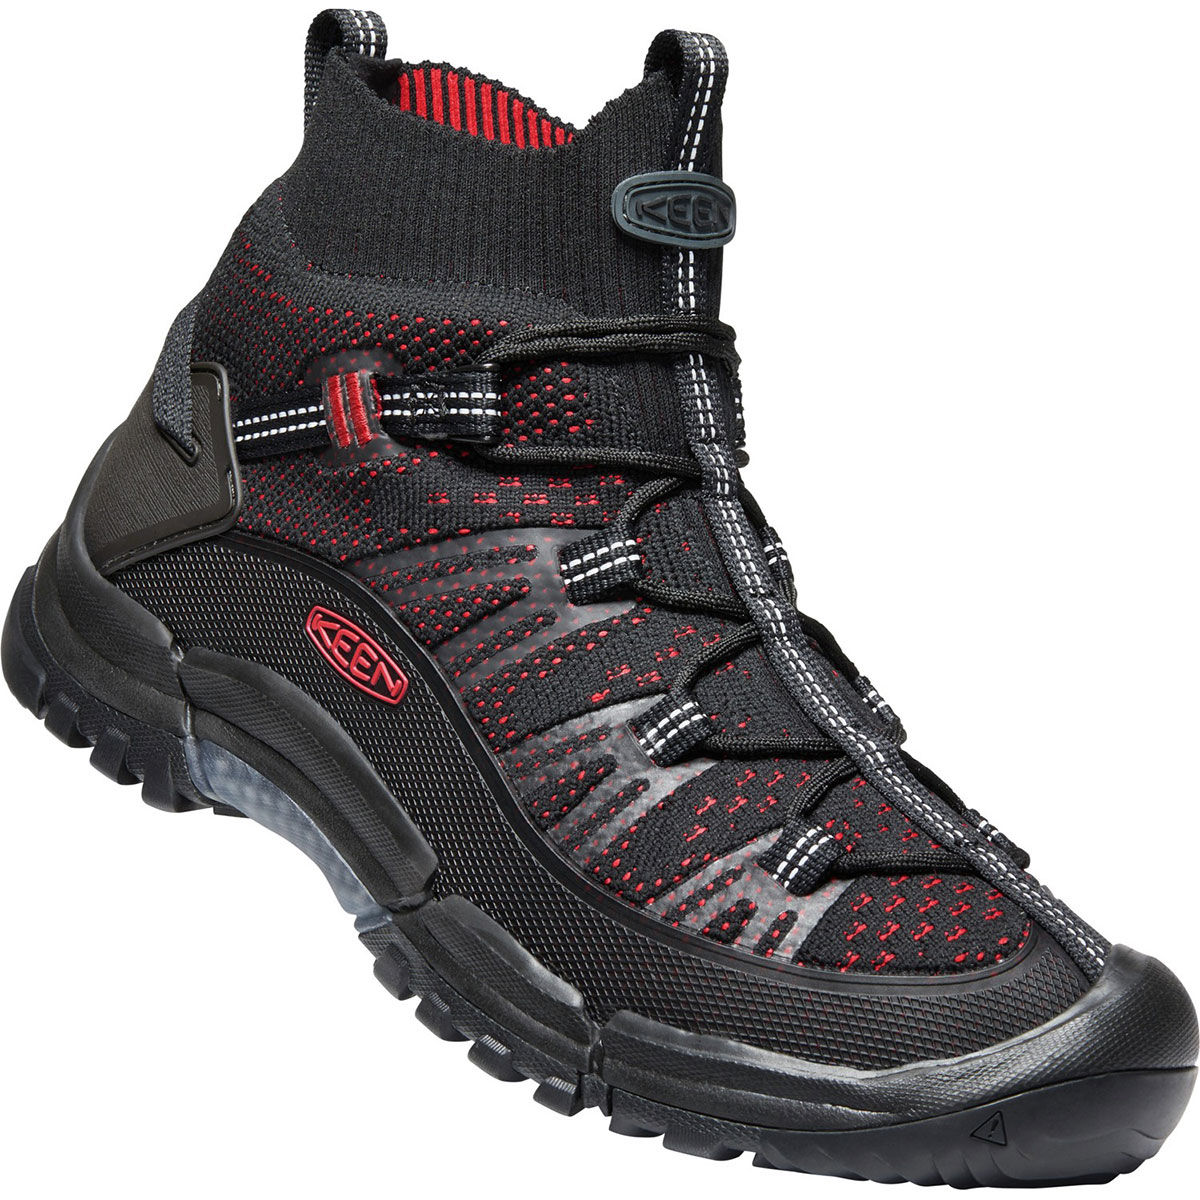 Keen Men's Axis Evo Mid Knit Hiking Boots - Black, 10